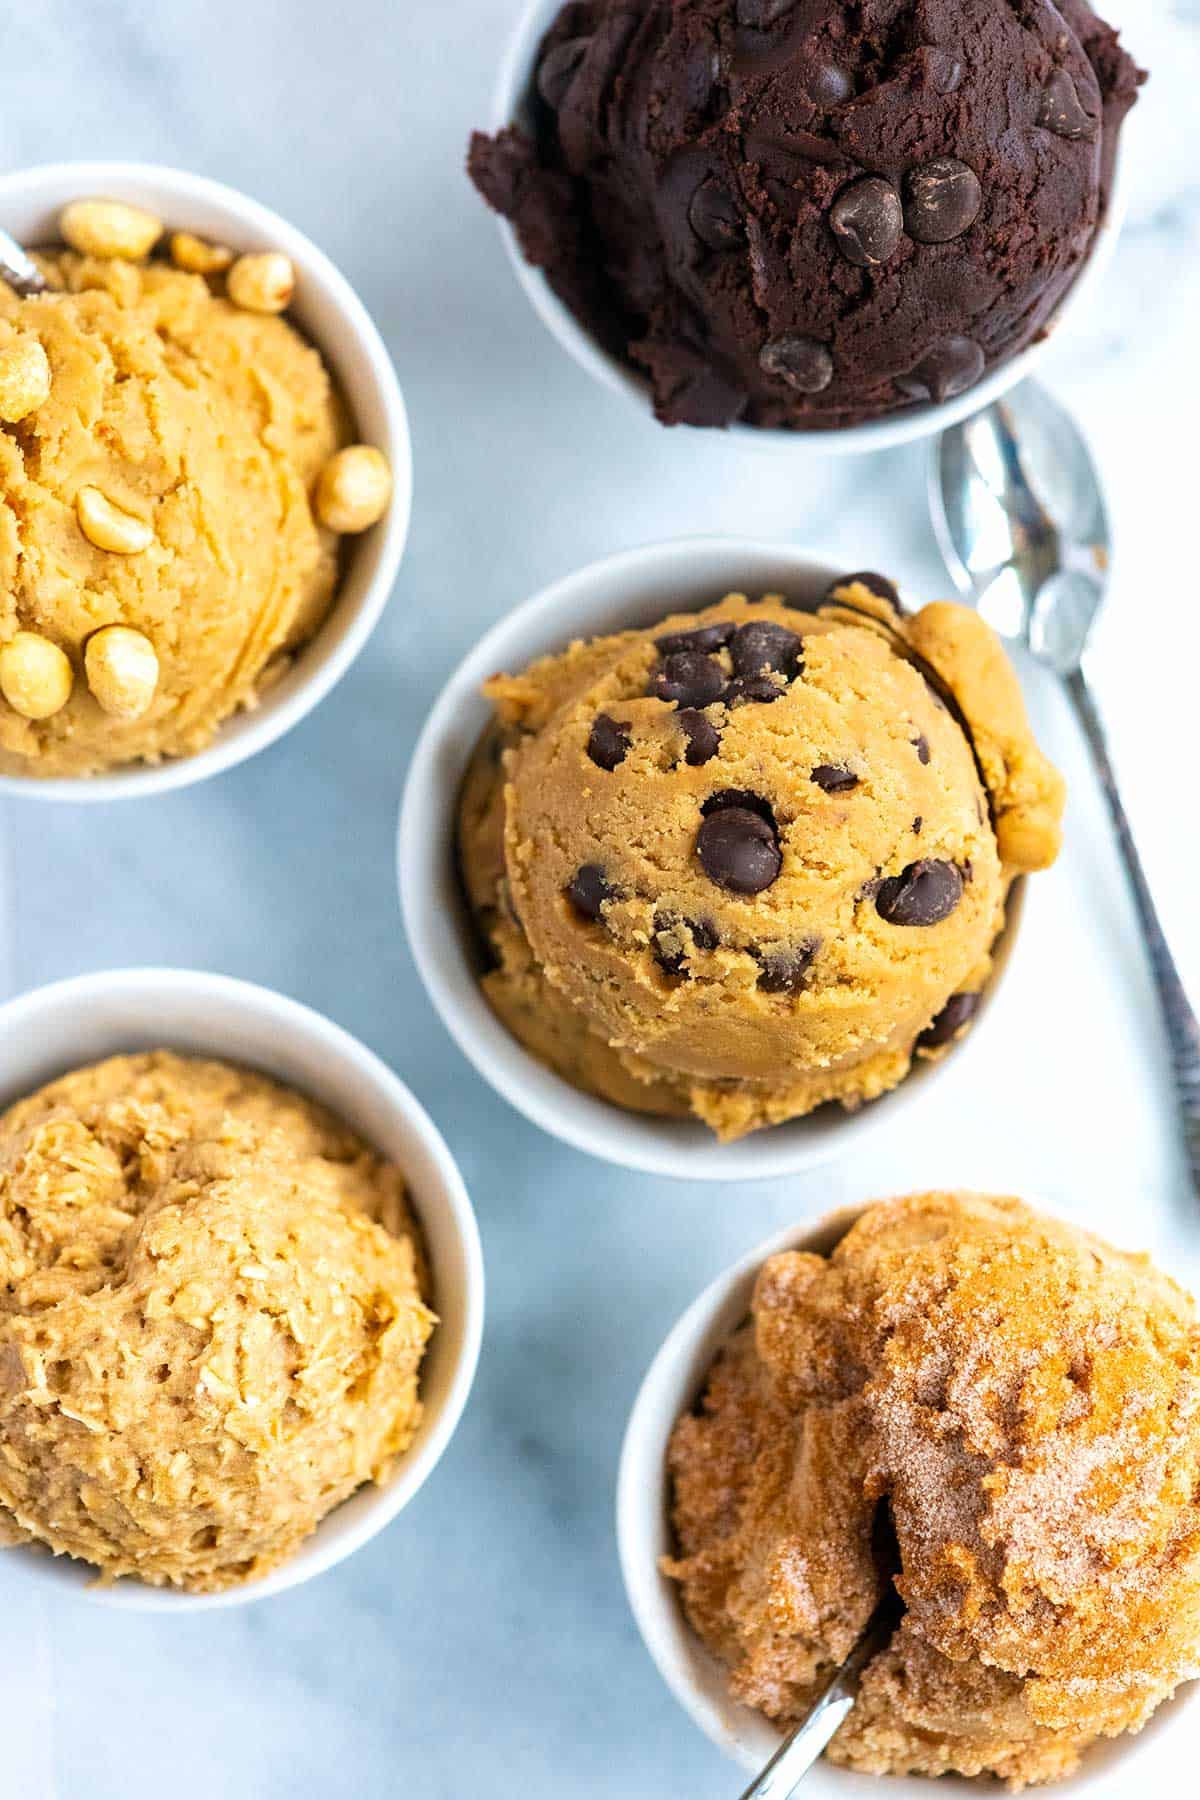 How to Make the Best Edible Cookie Dough